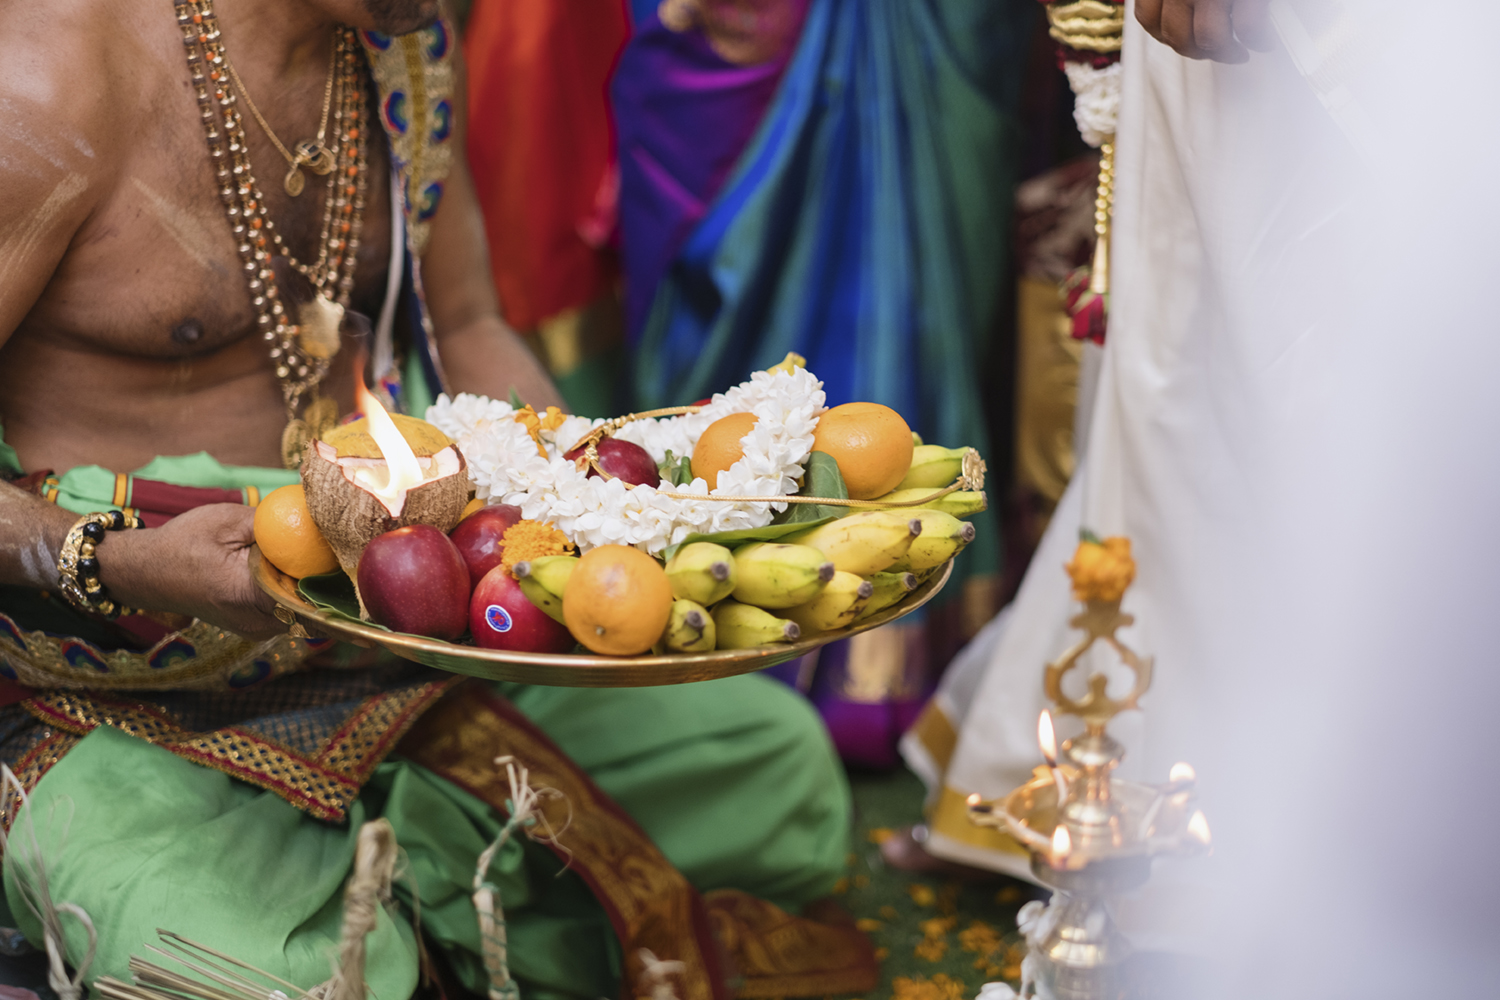 The changing dowry practices in Sri Lanka’s Northern Province